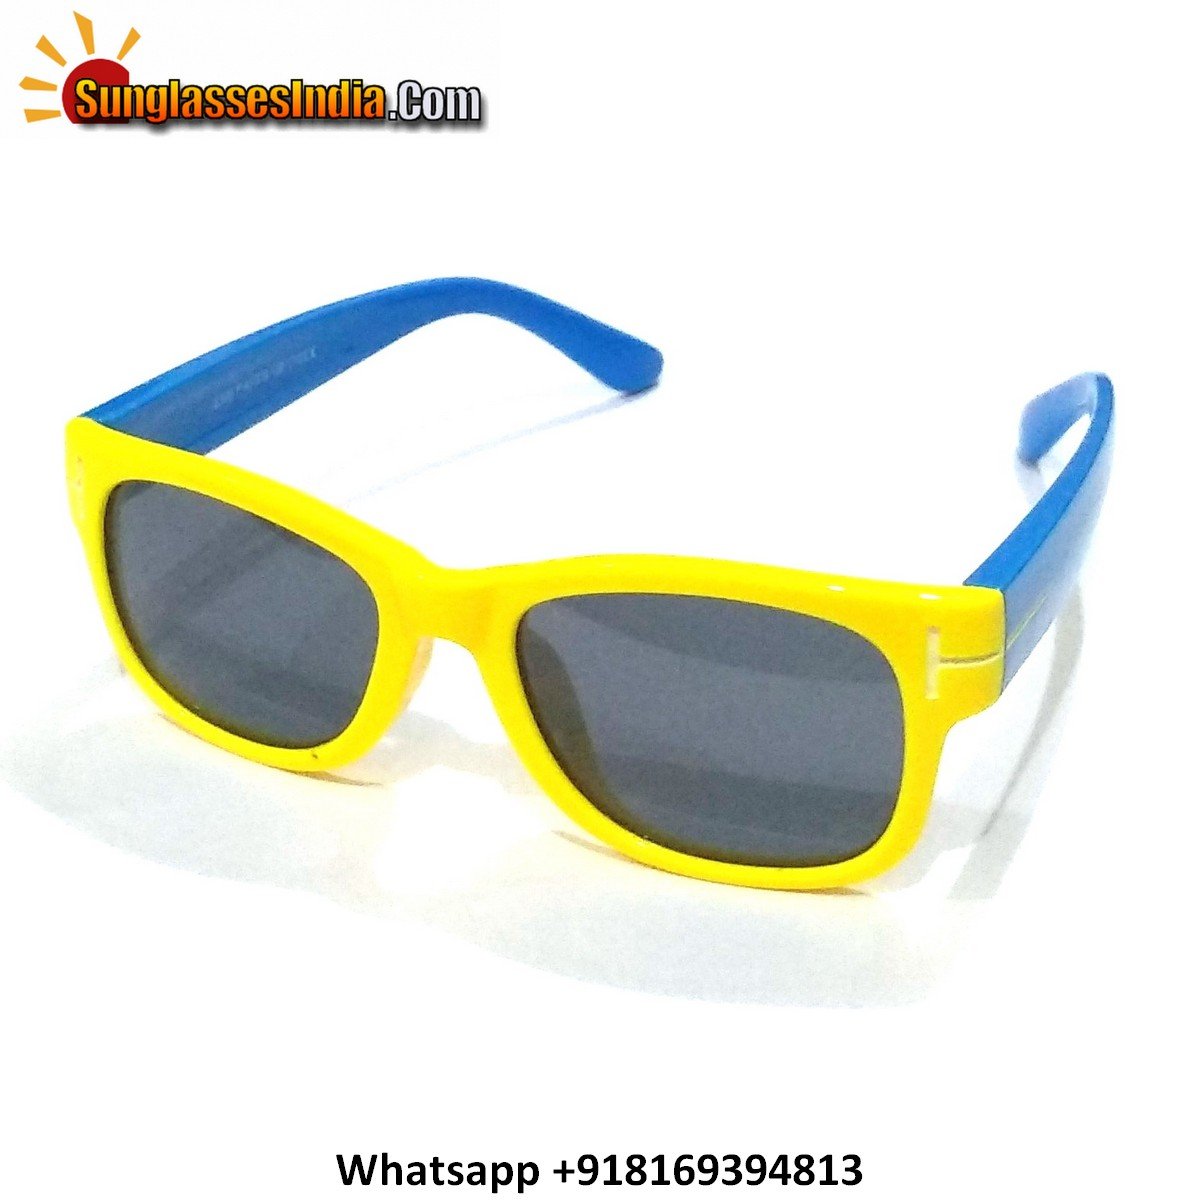 Unbreakable Kids Polarized Sunglasses Light Weight TR Material S899YellowBlue